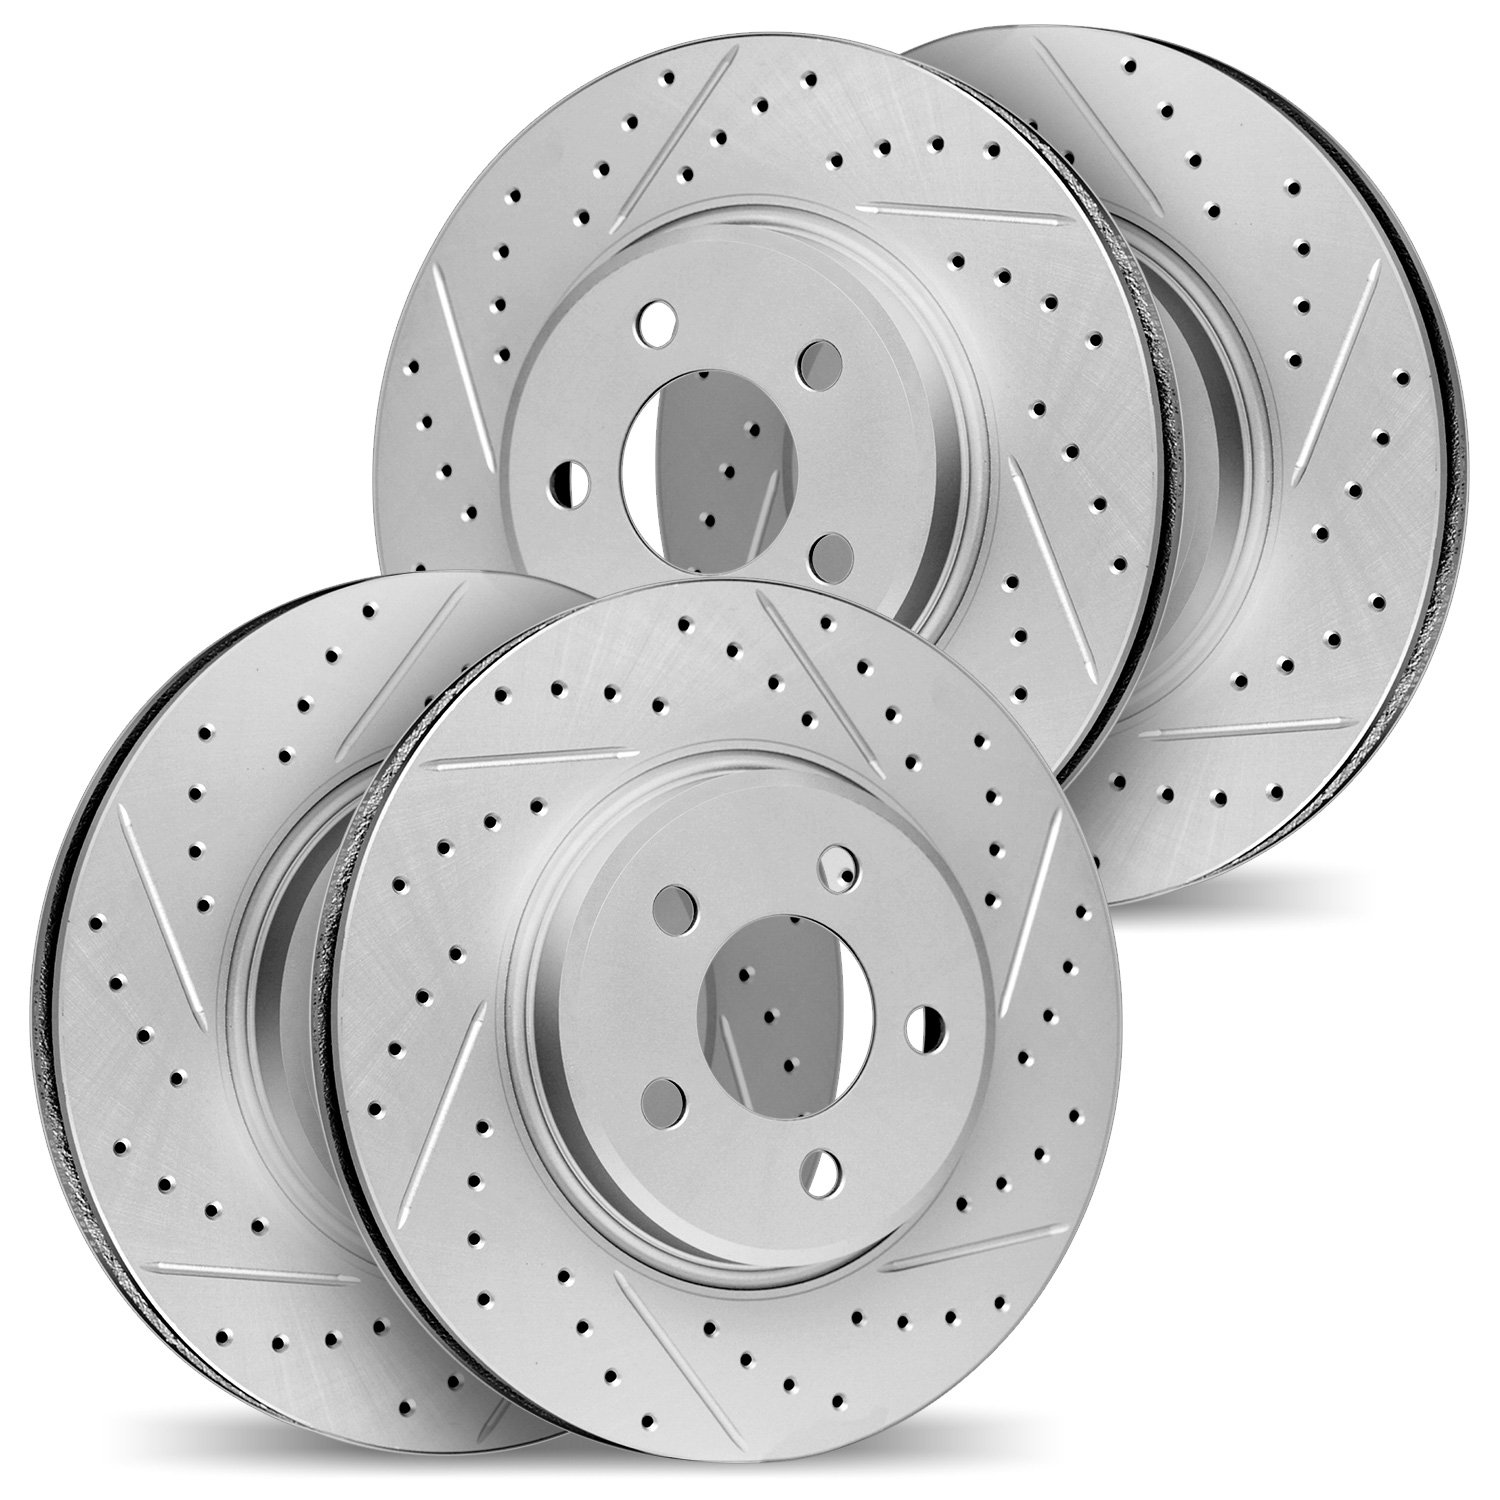 2004-74012 Geoperformance Drilled/Slotted Brake Rotors, 2003-2018 Multiple Makes/Models, Position: Front and Rear